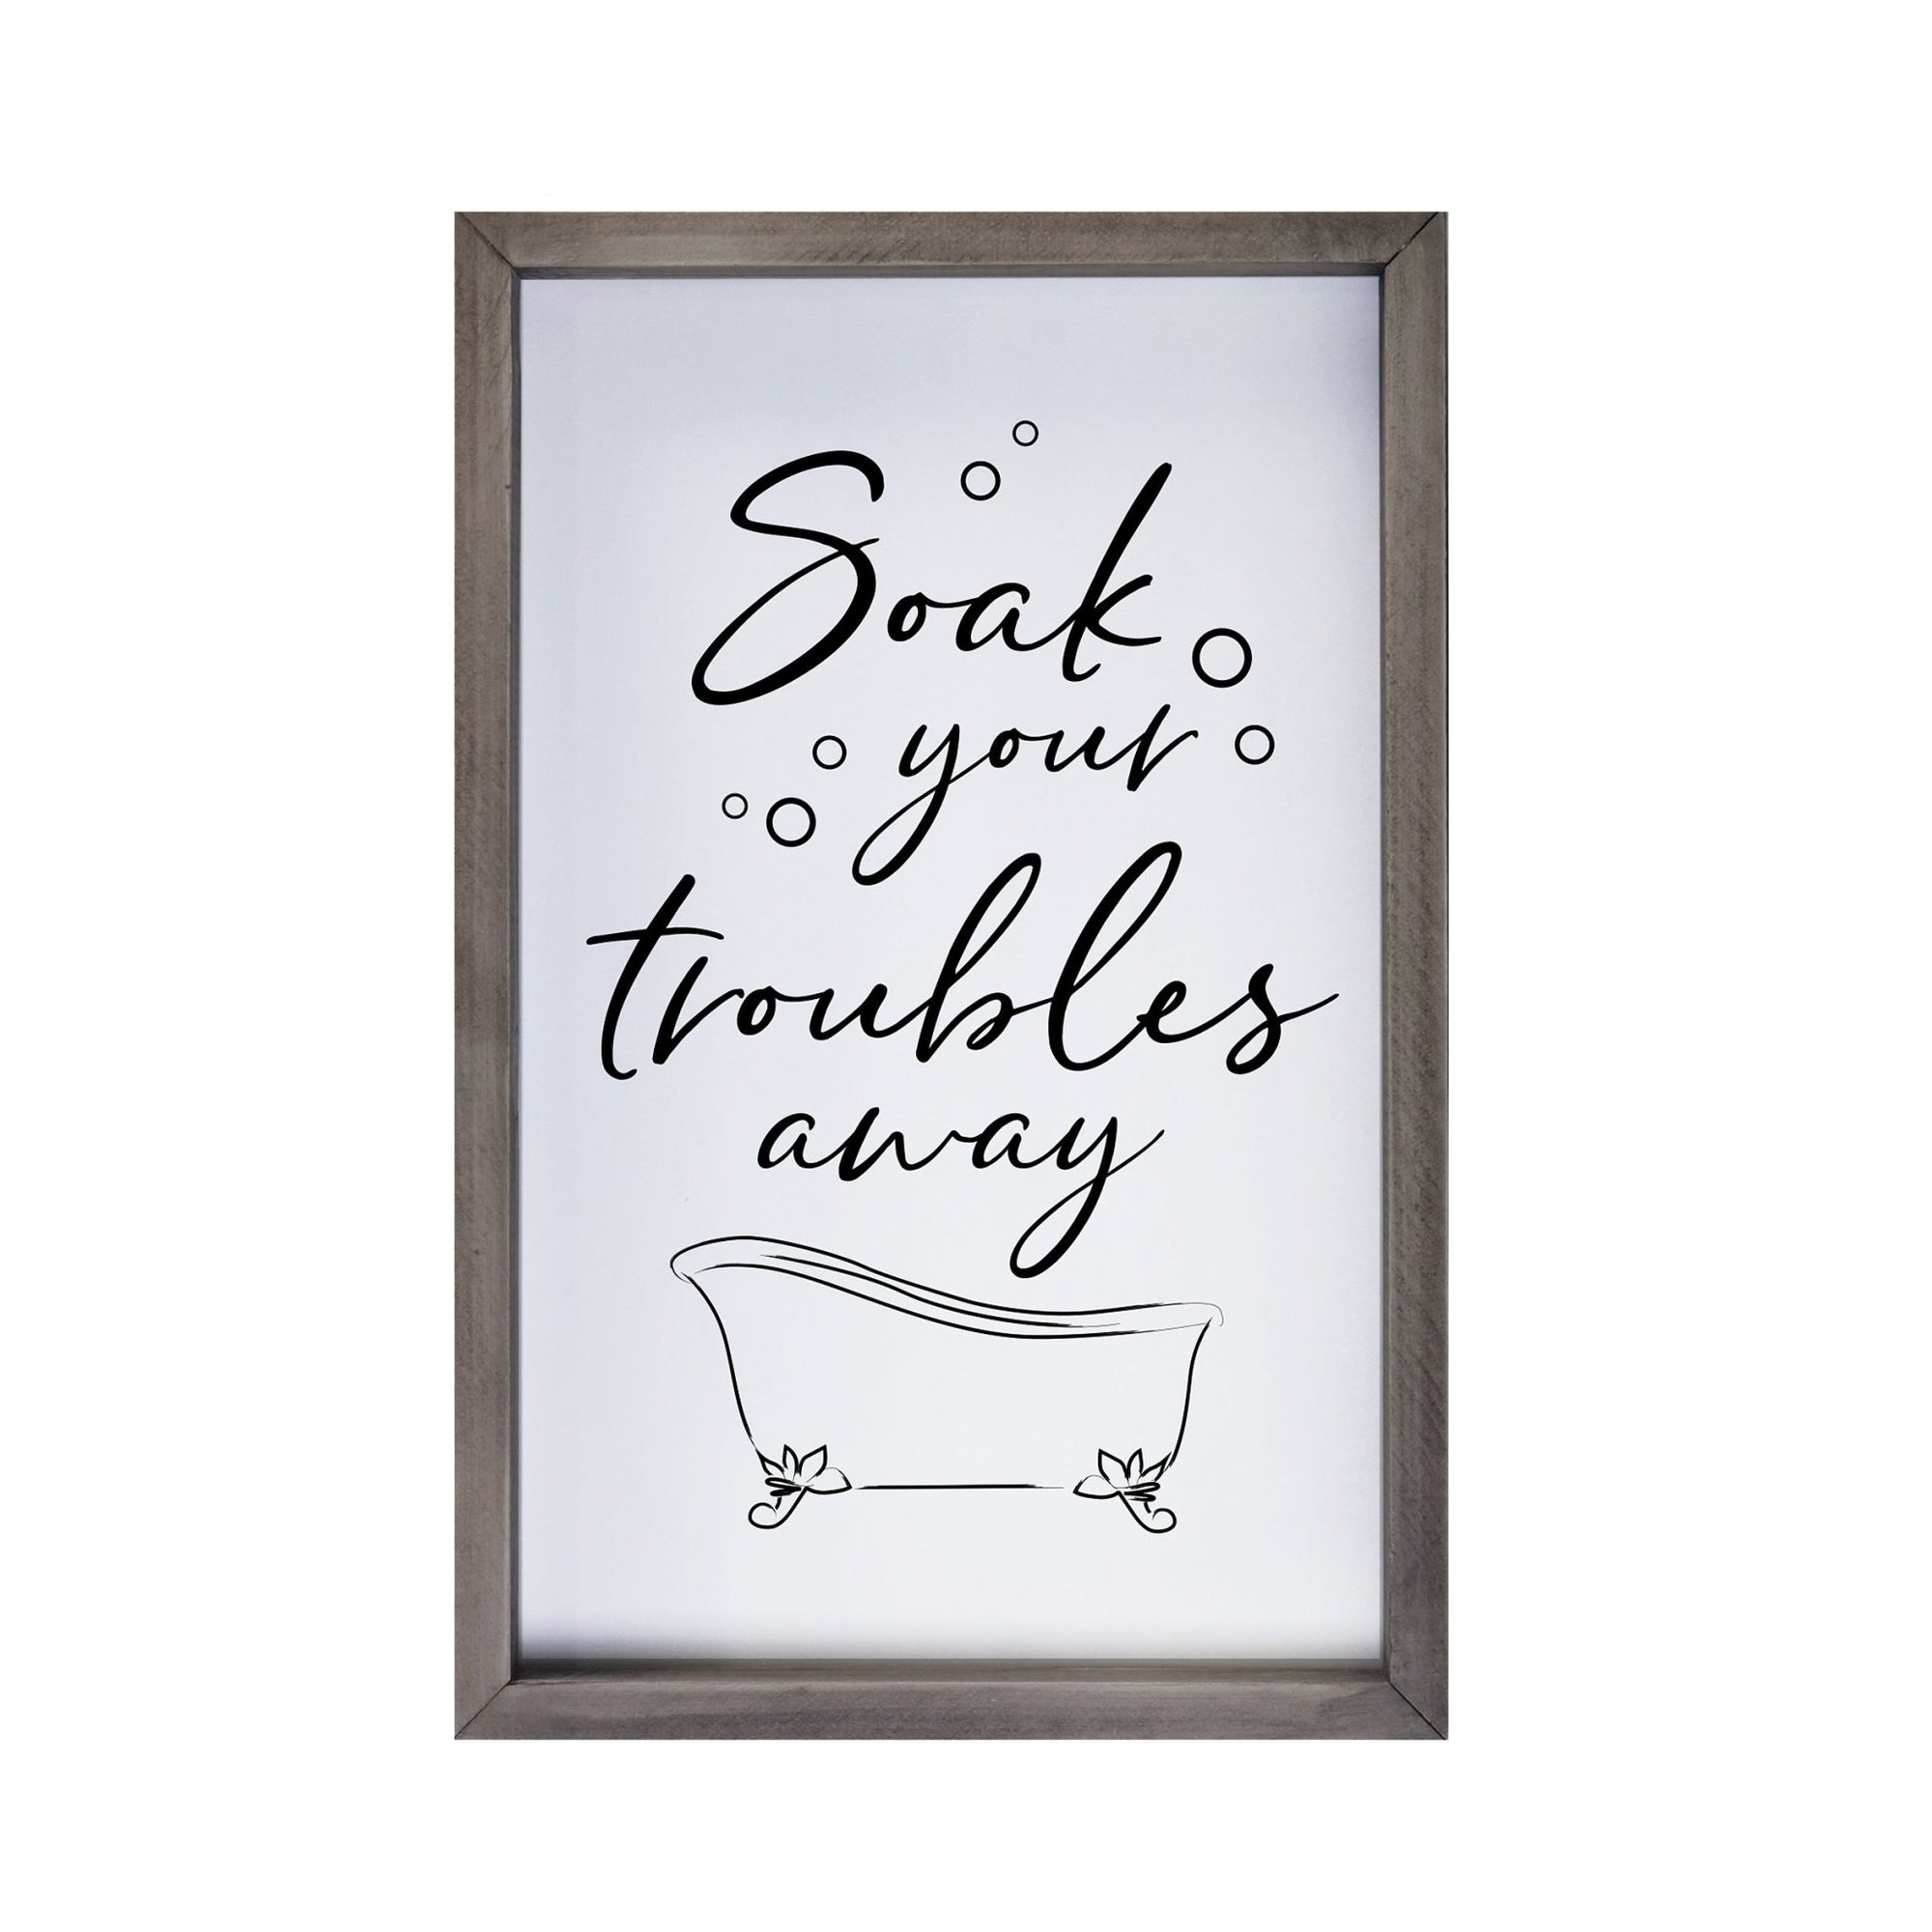 Inspirational Bathroom Decor Framed Shadow Box 7x10in (Soak Your Troubles) - LifeSong Milestones